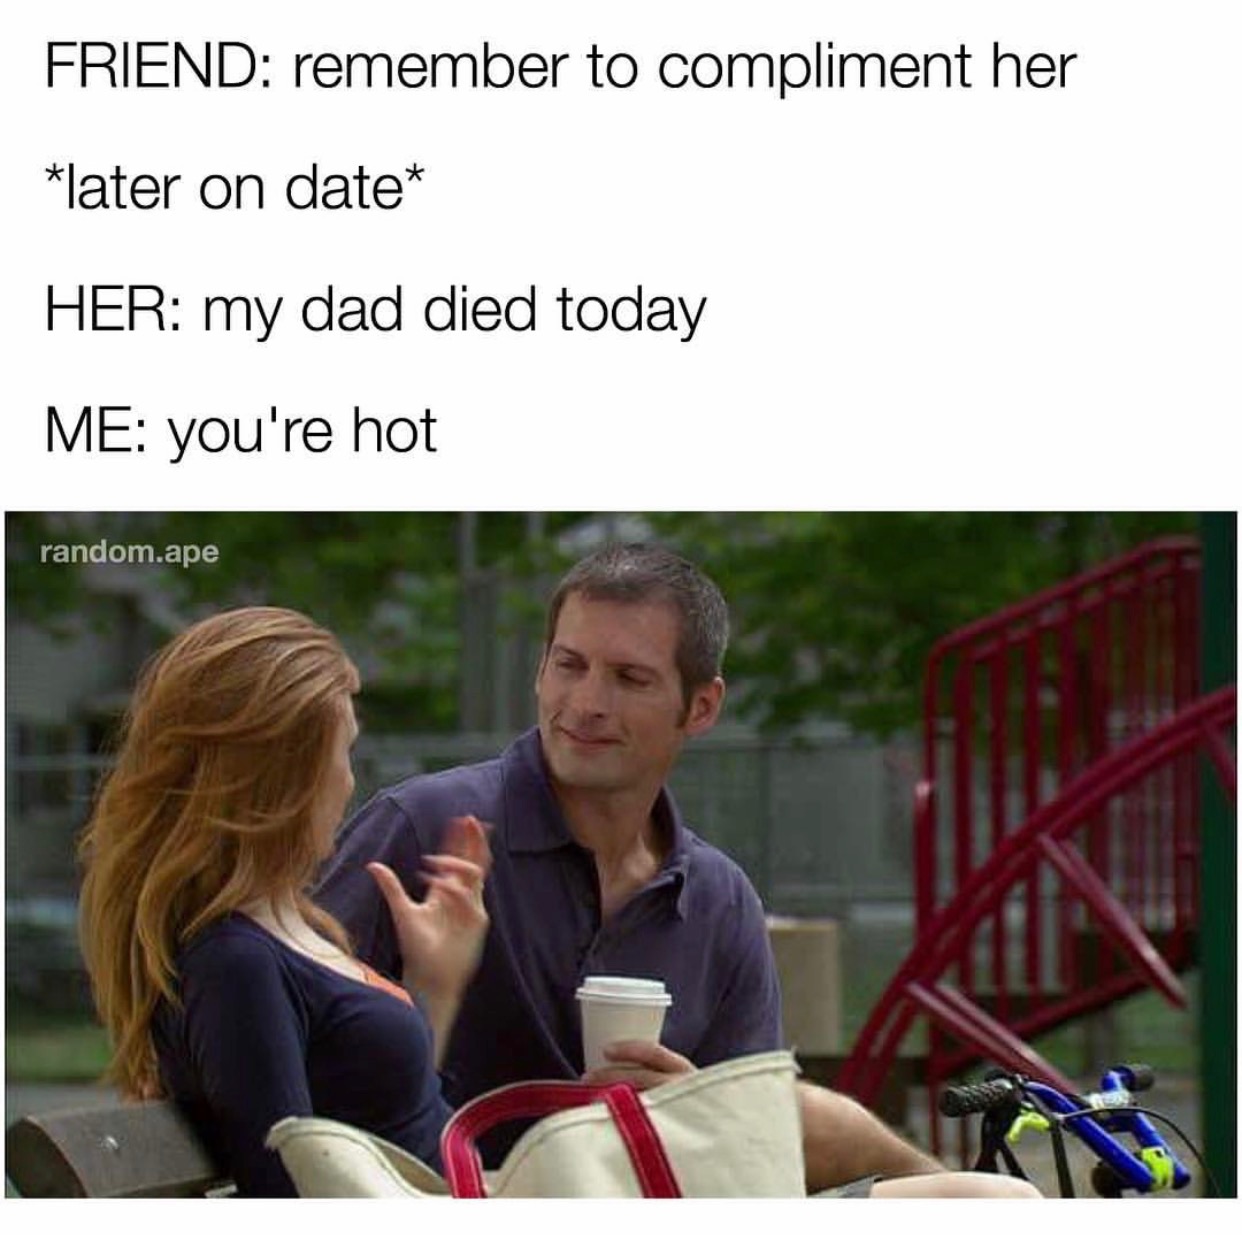 memes - your friend has a hot dad - Friend remember to compliment her later on date Her my dad died today Me you're hot random.ape